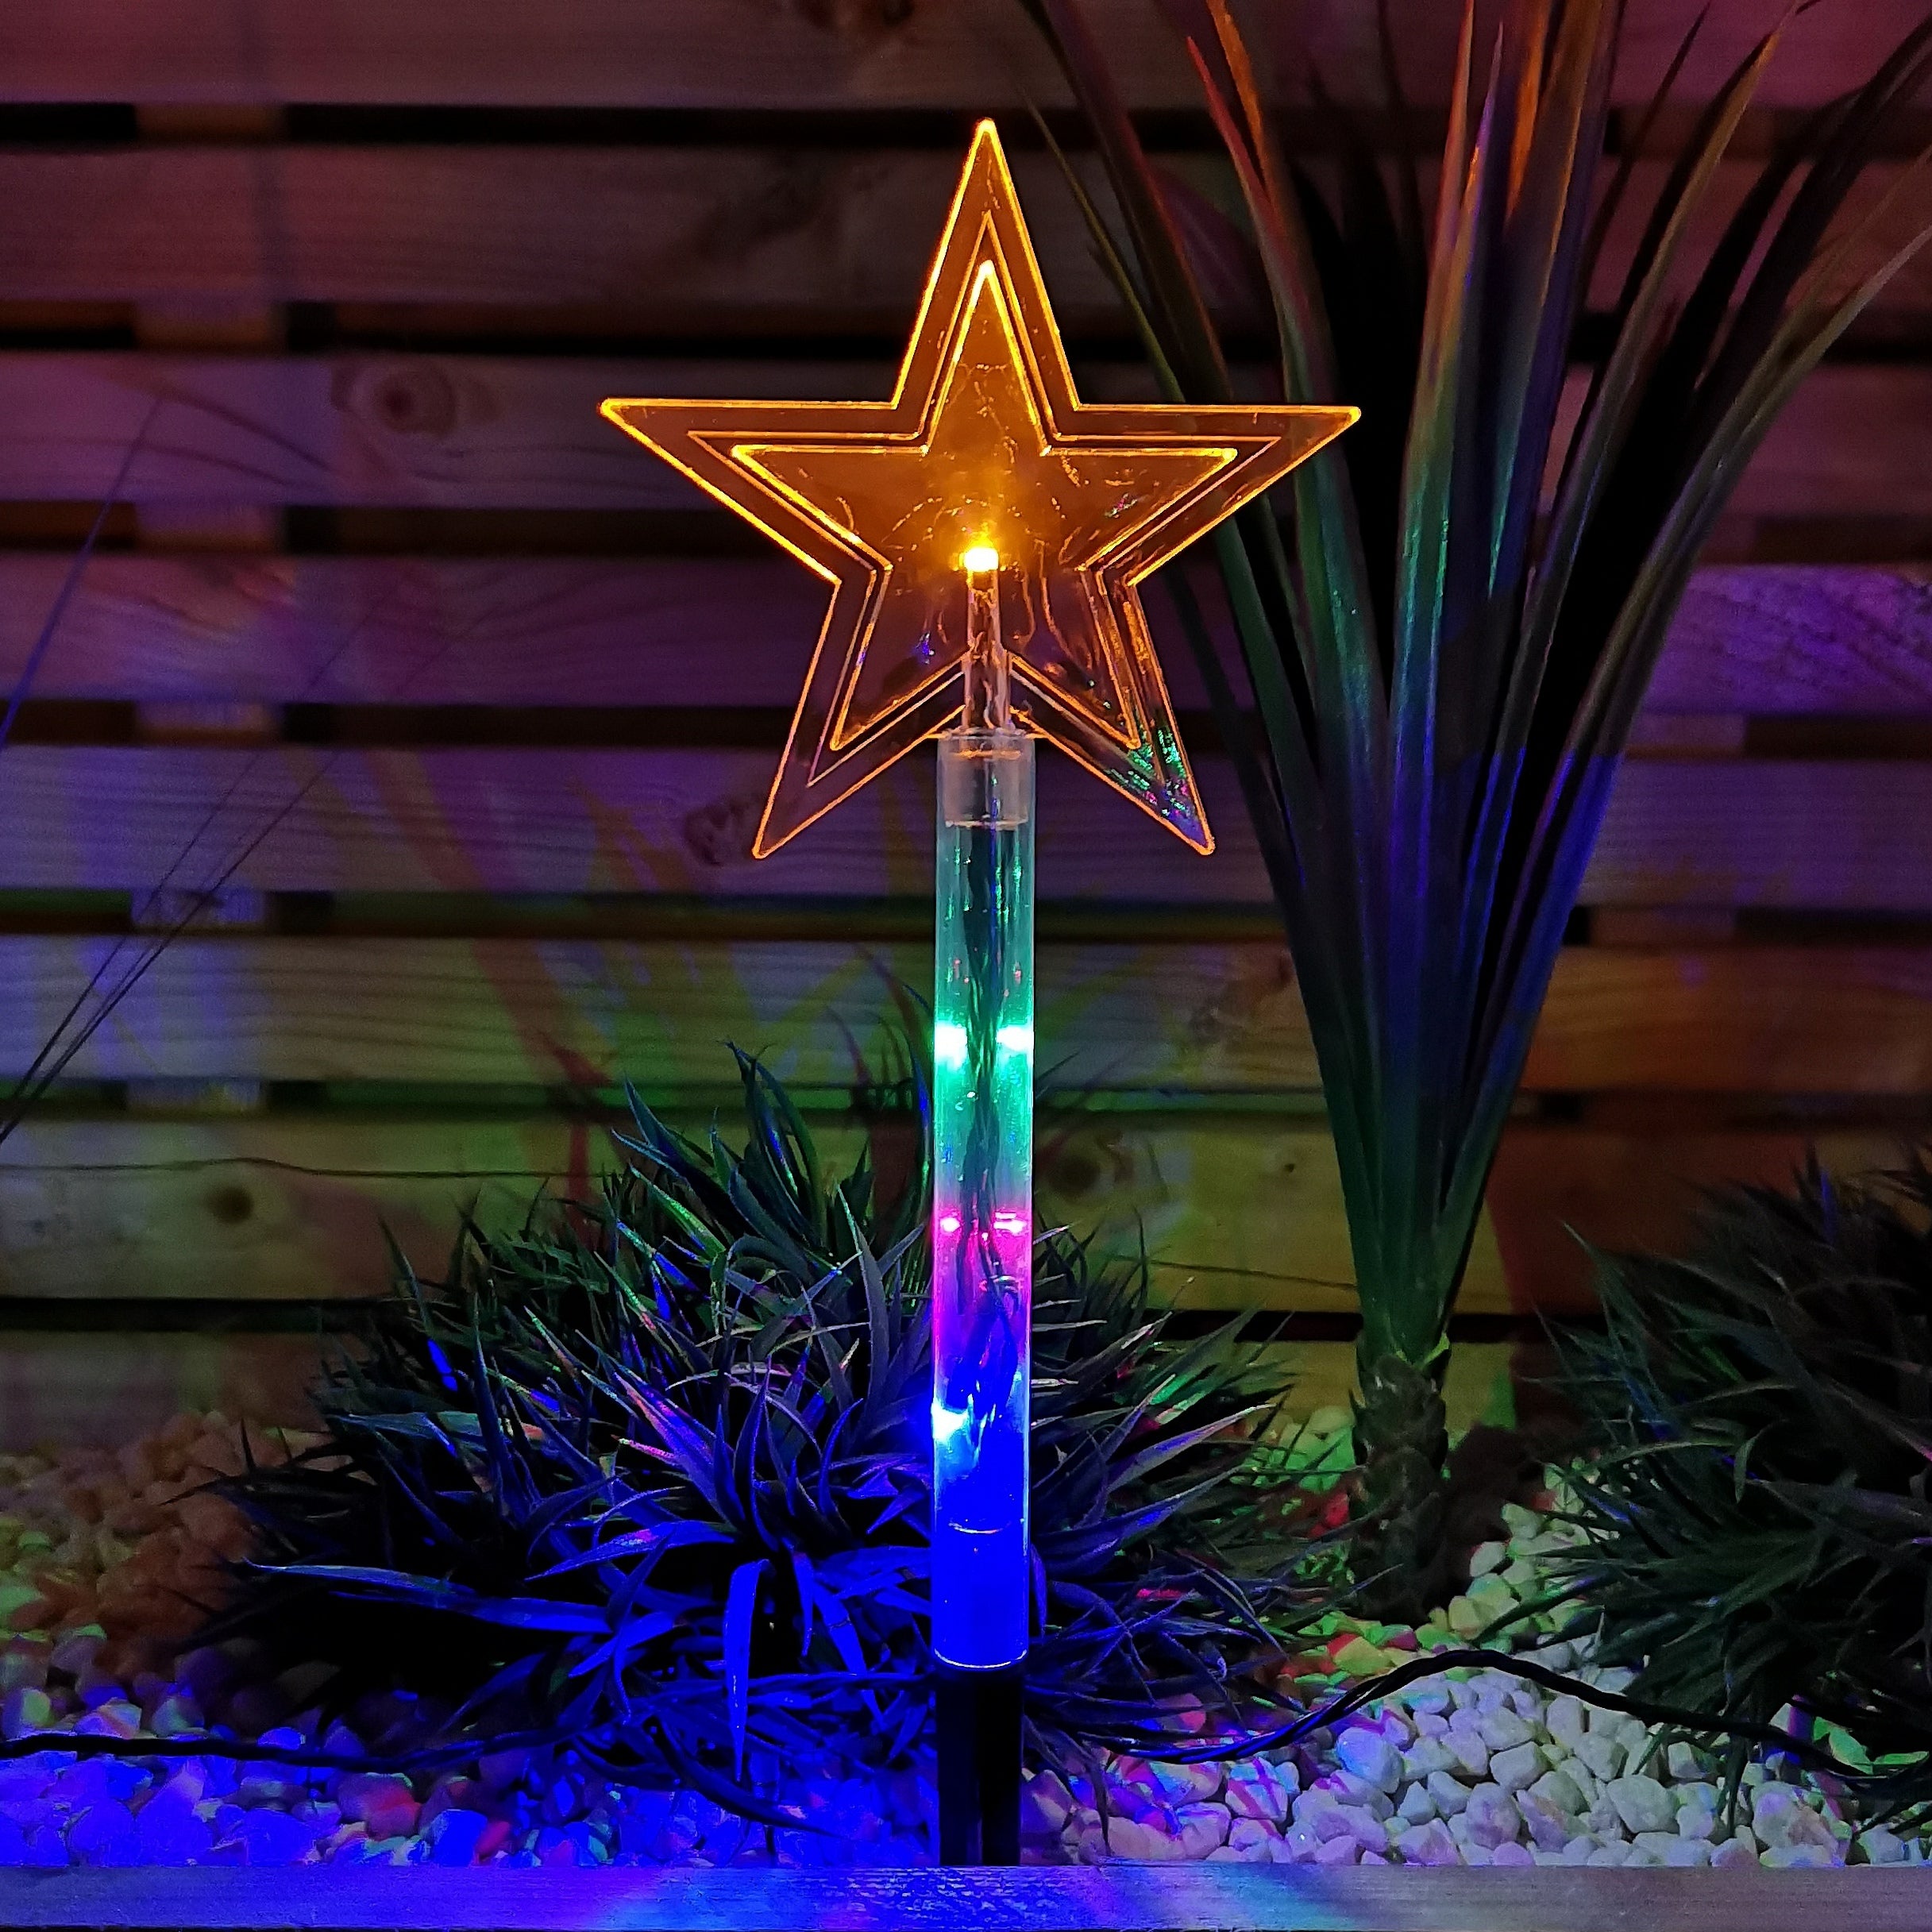 Set of 8 Battery Operated LED Multi Coloured Star Path Lights Christmas Decoration with Timer